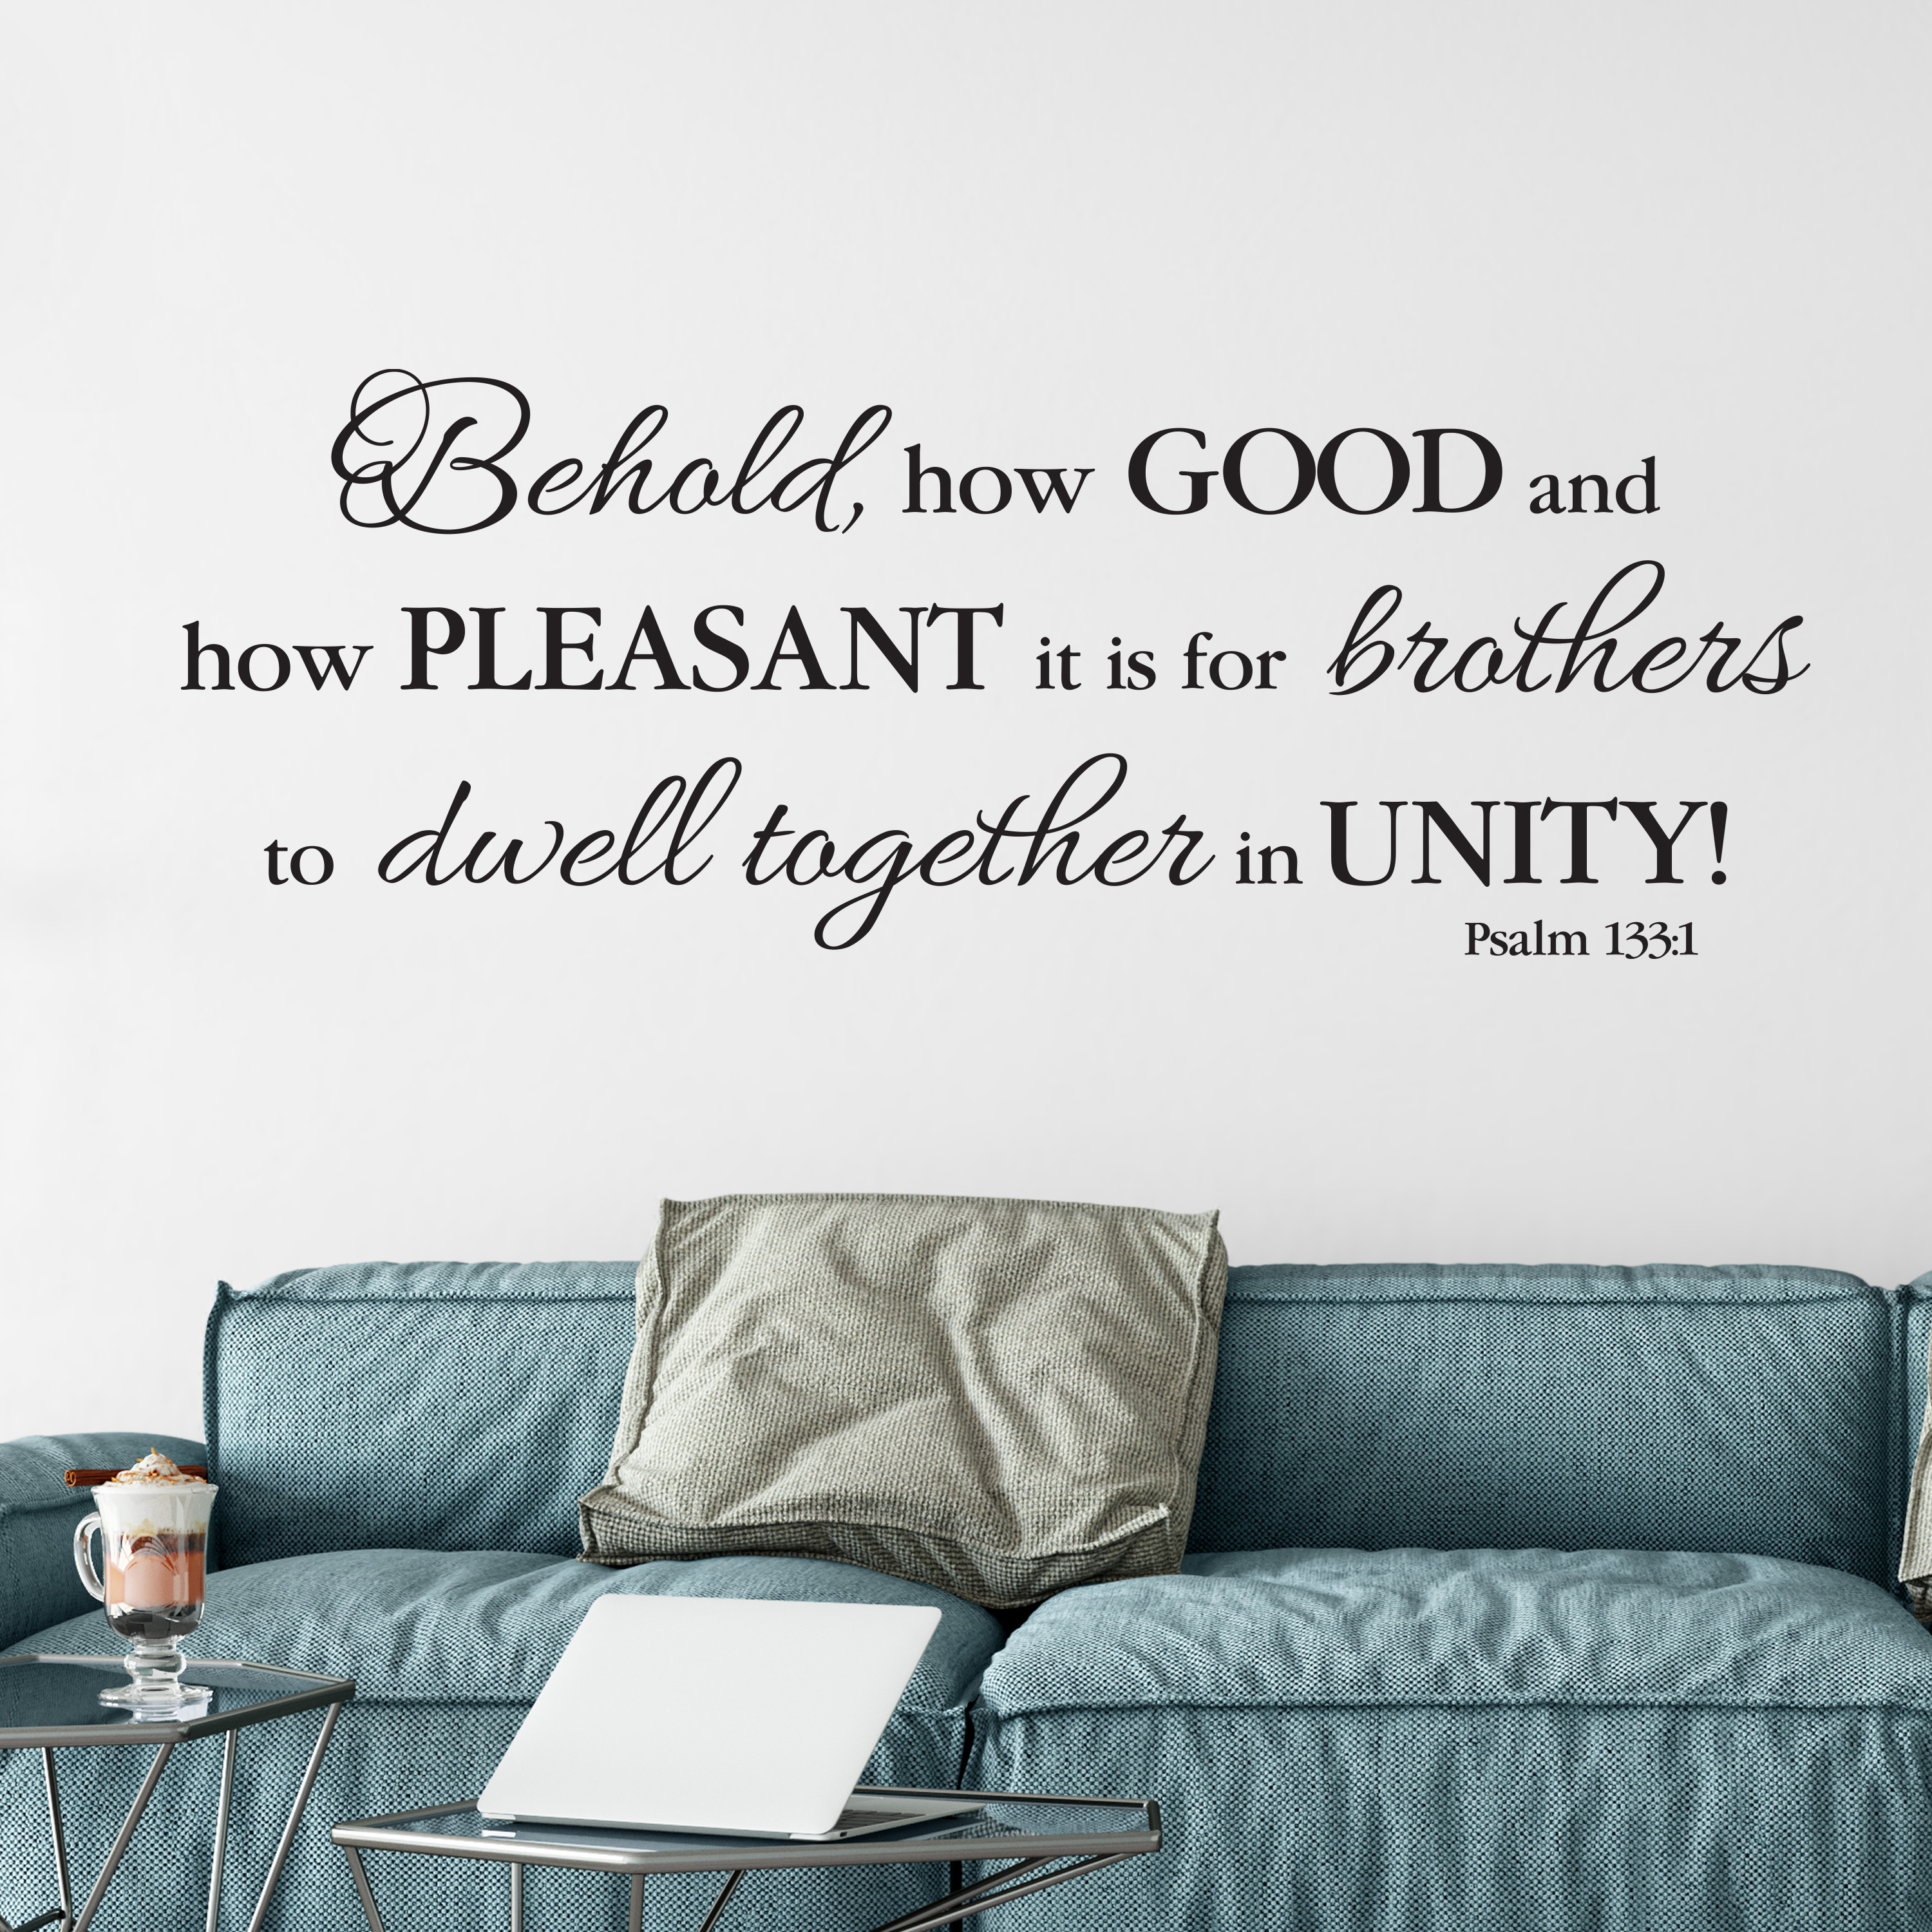 https://wildeyessigns.com/wp-content/uploads/2017/12/ps133v1-0001-Behold-how-good-and-how-pleasant-it-is-for-brothers-to-dwell-together-in-unity-AP1.jpg